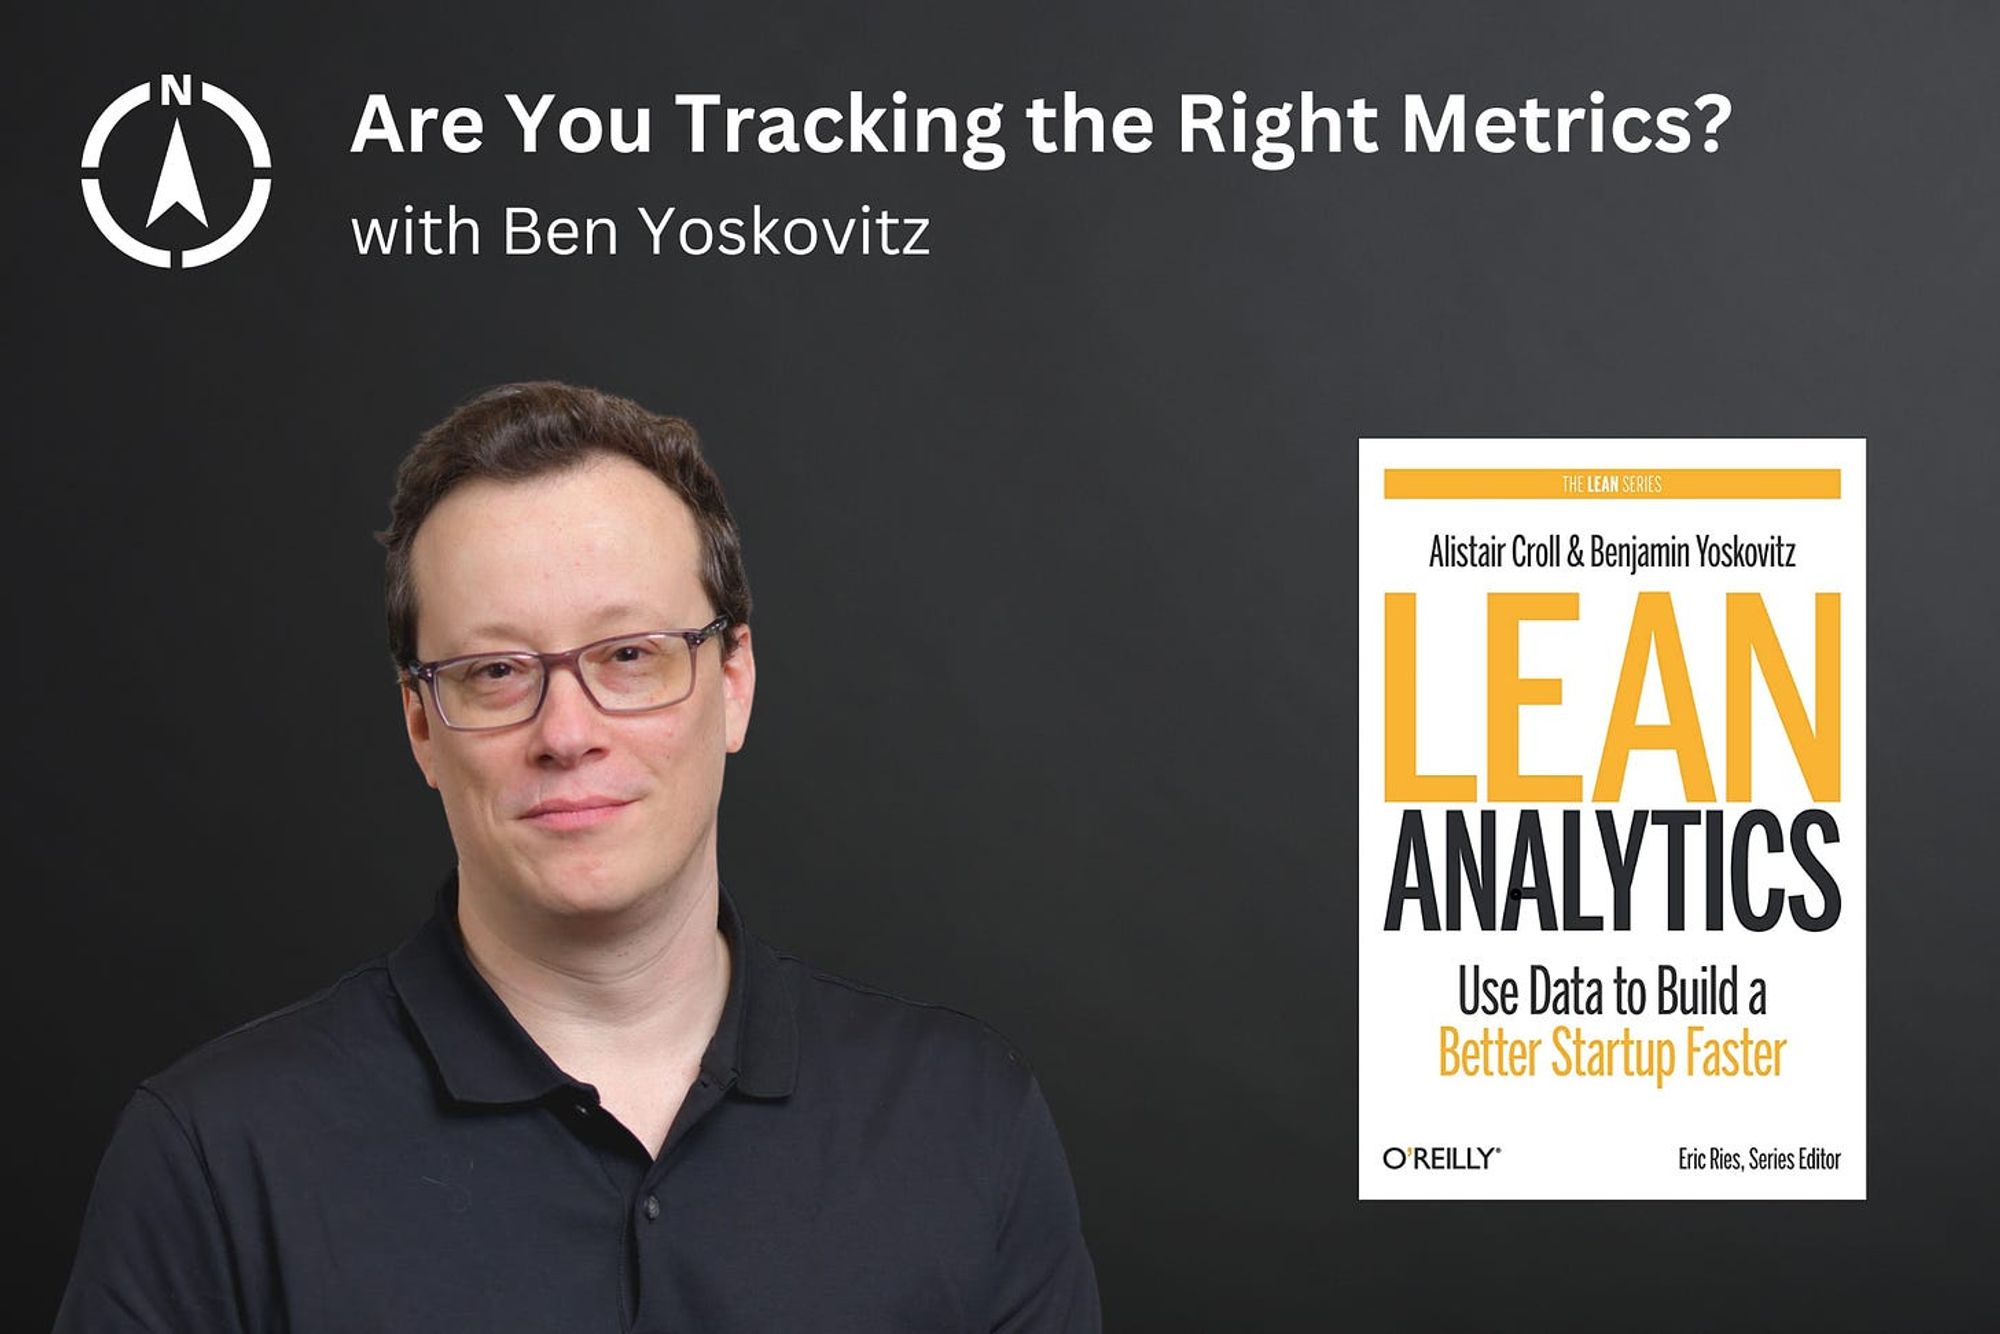 Are You Tracking the Right Metrics? - by Ben Yoskovitz